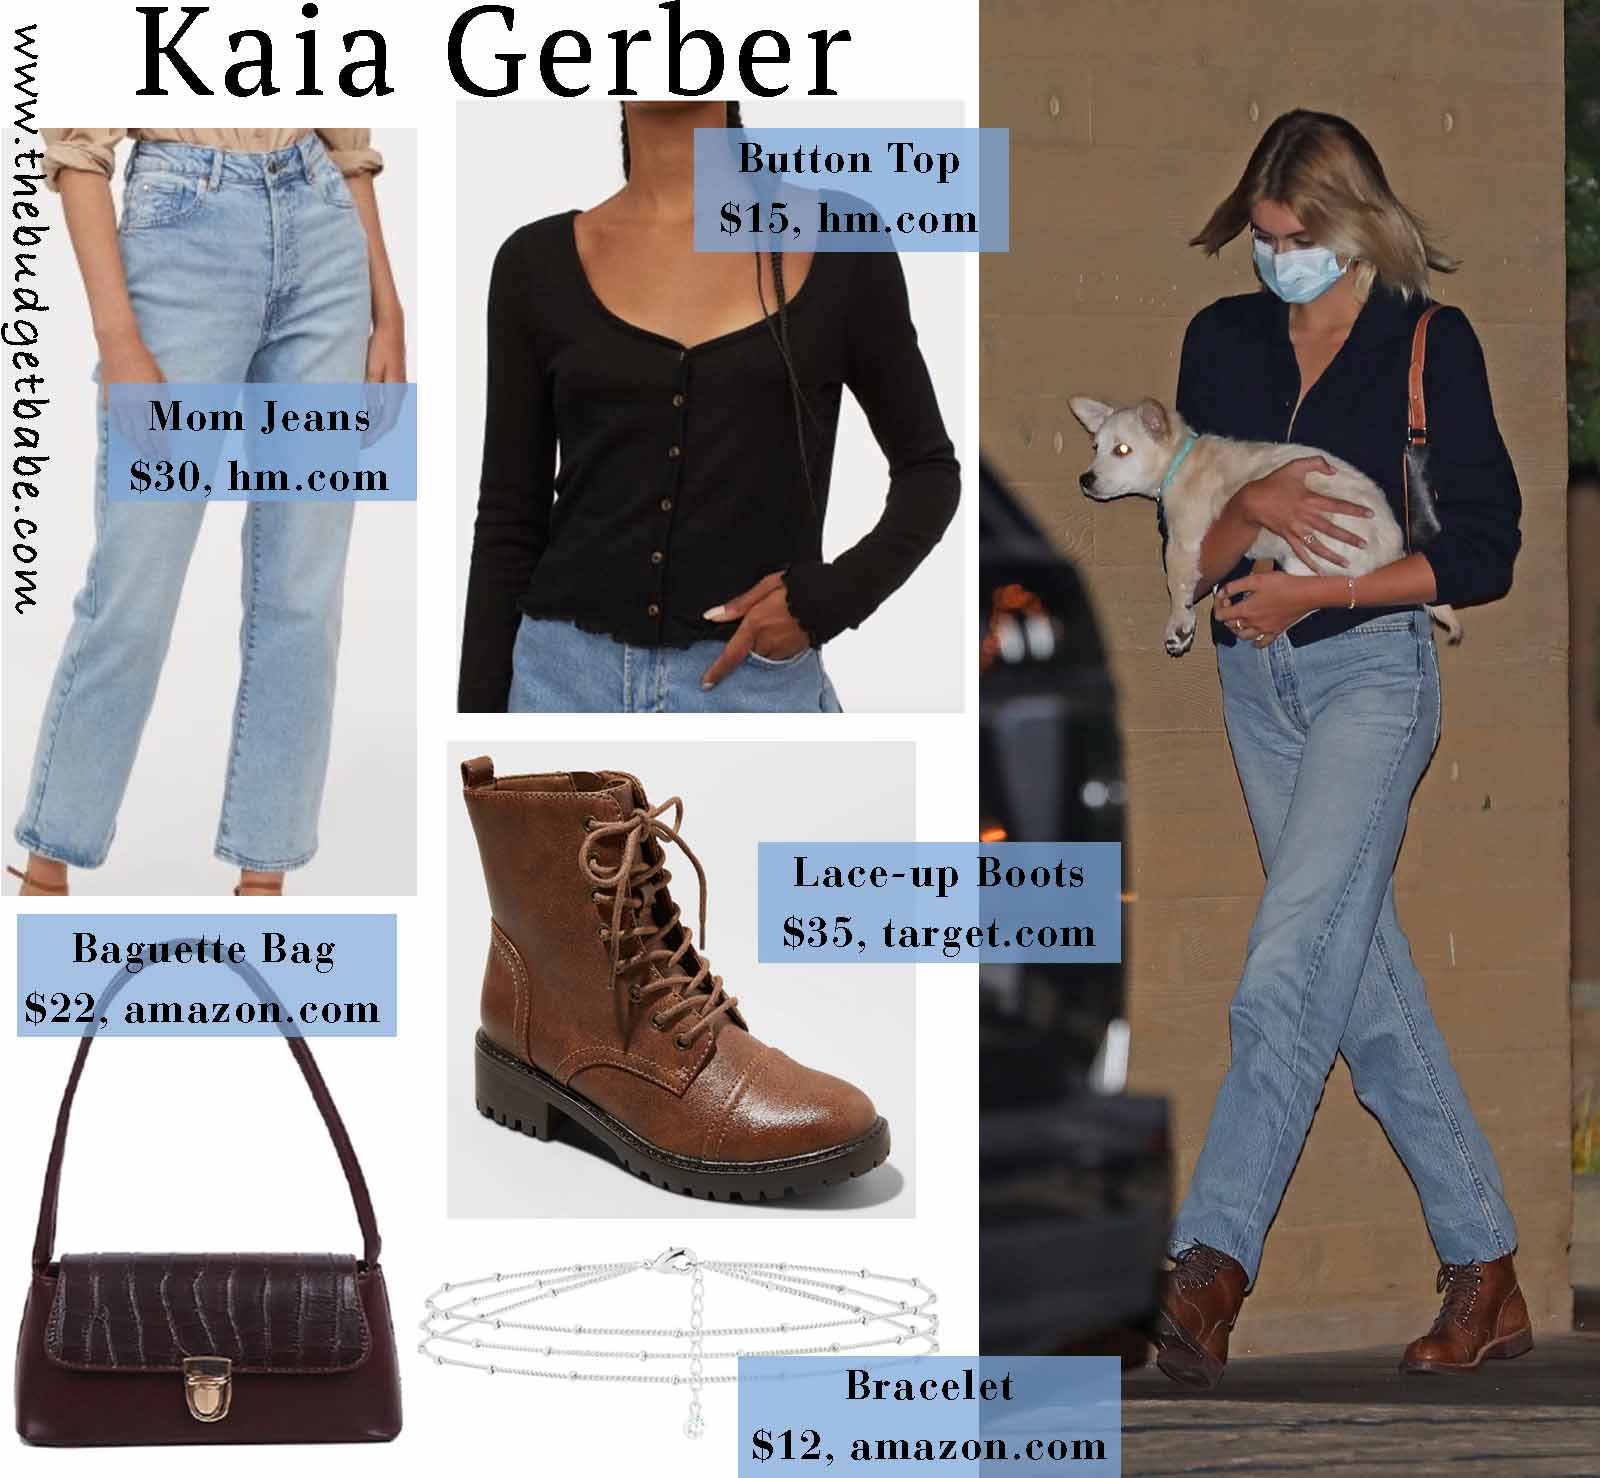 Kaia Gerber is chic in 90's style